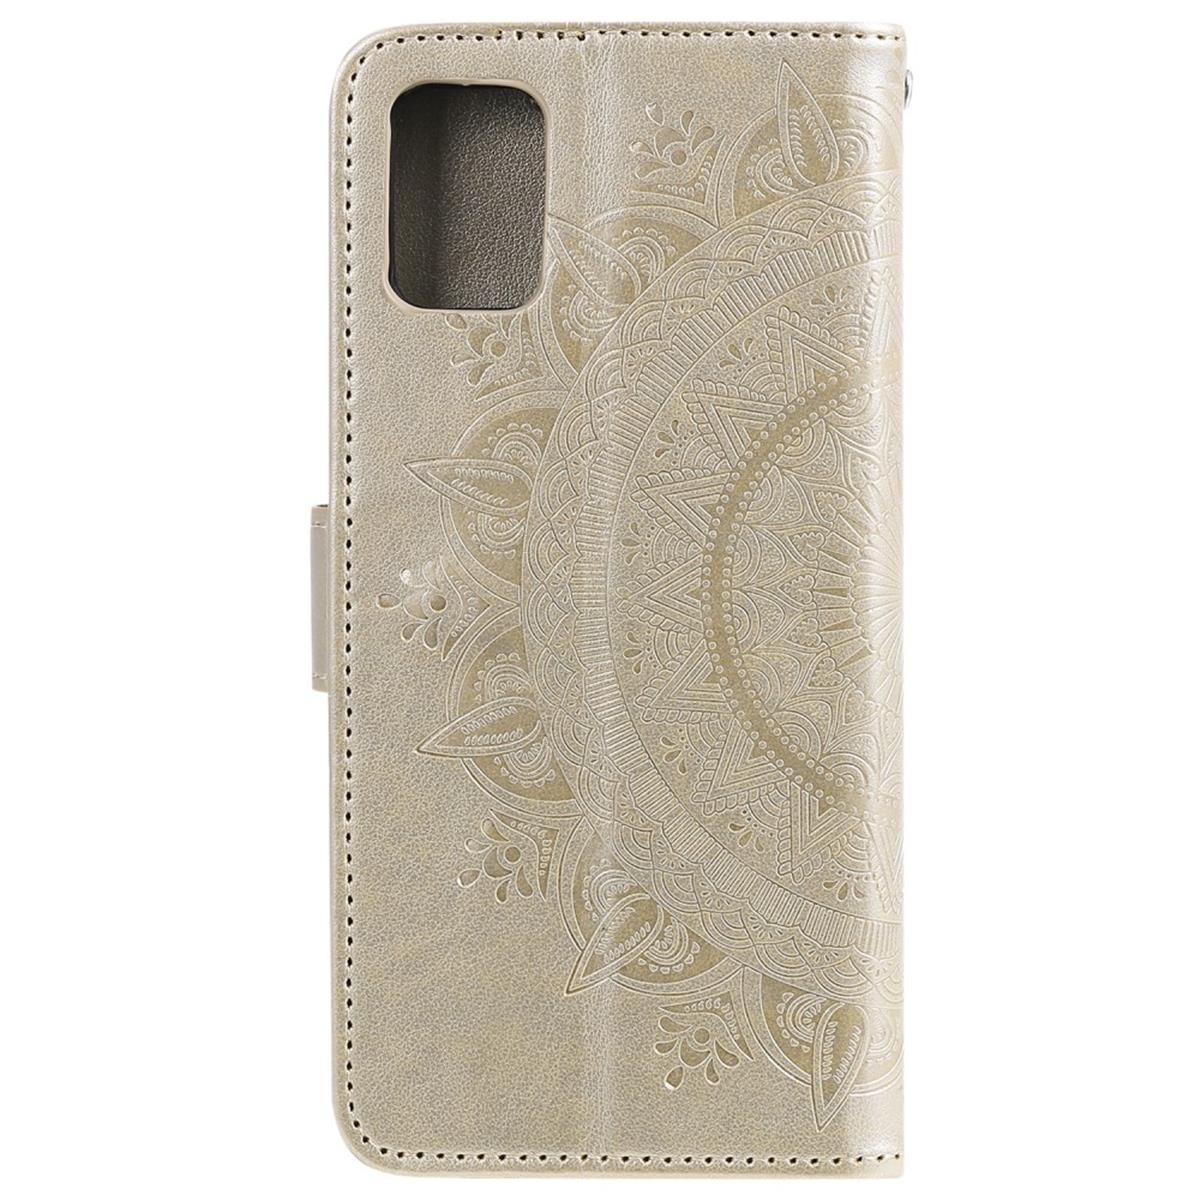 COVERKINGZ Klapphülle A31, Gold Mandala Samsung, mit Bookcover, Muster, Galaxy